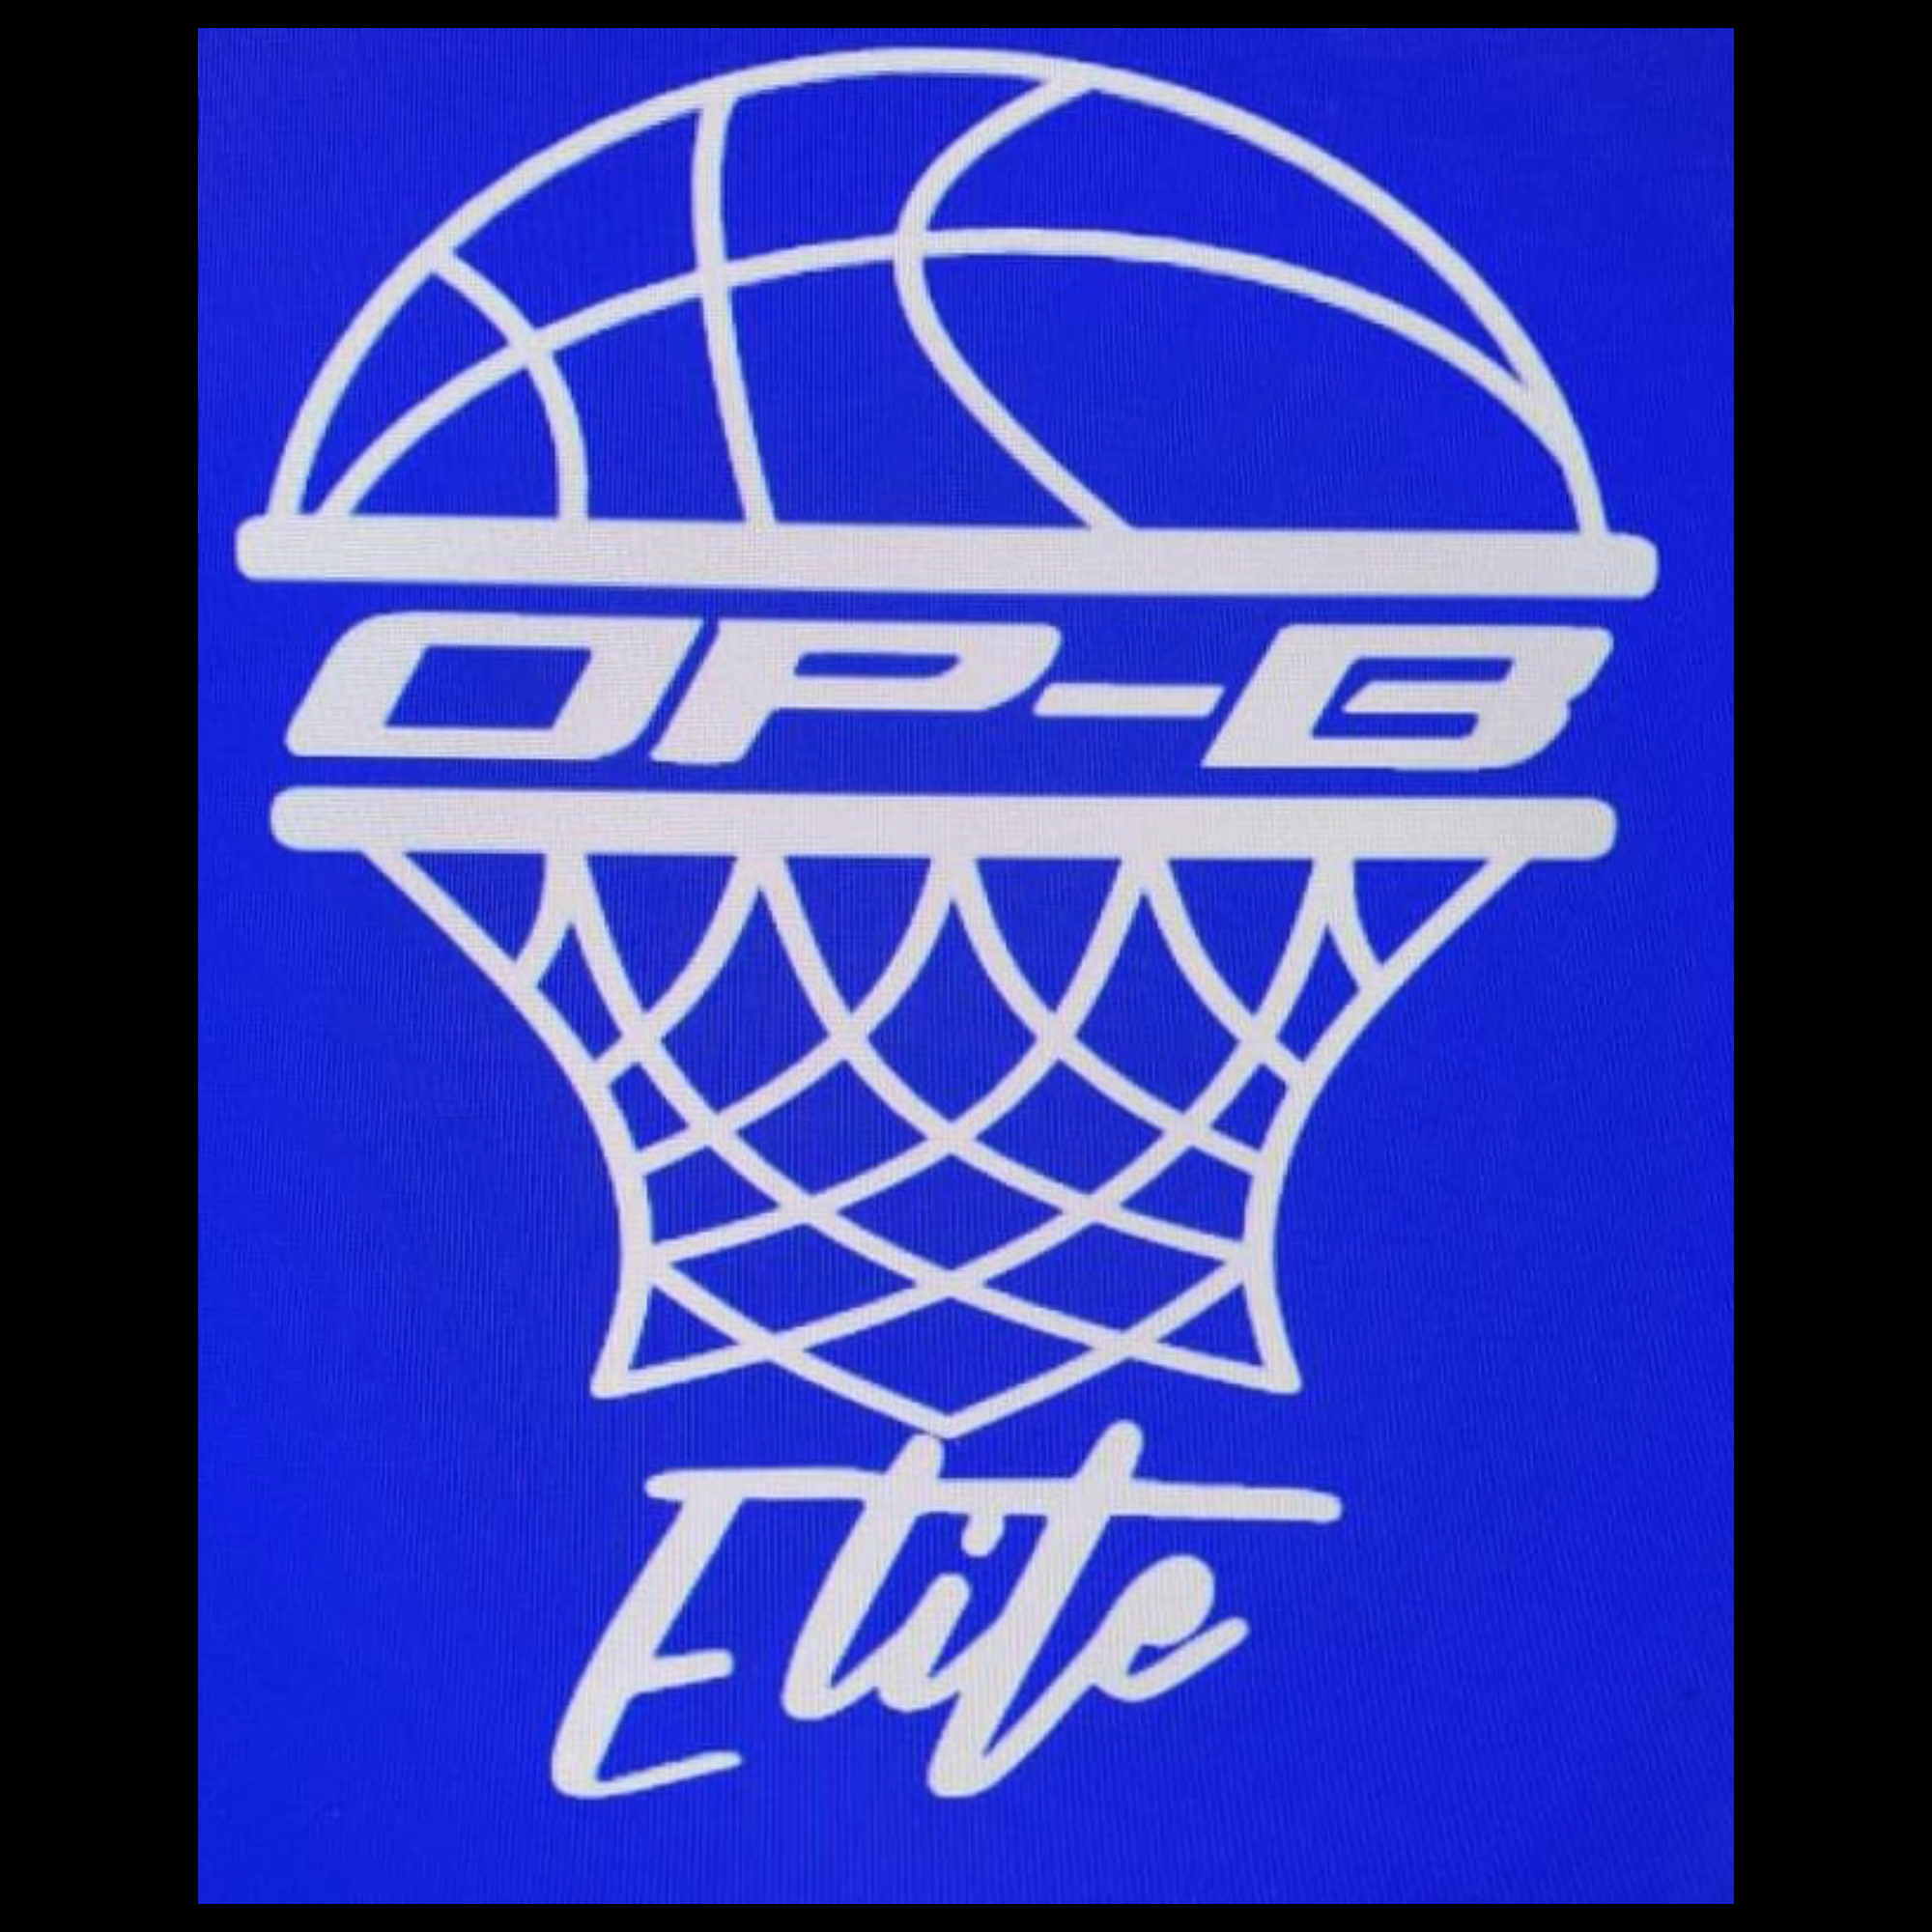 The official logo of OP-B Elite